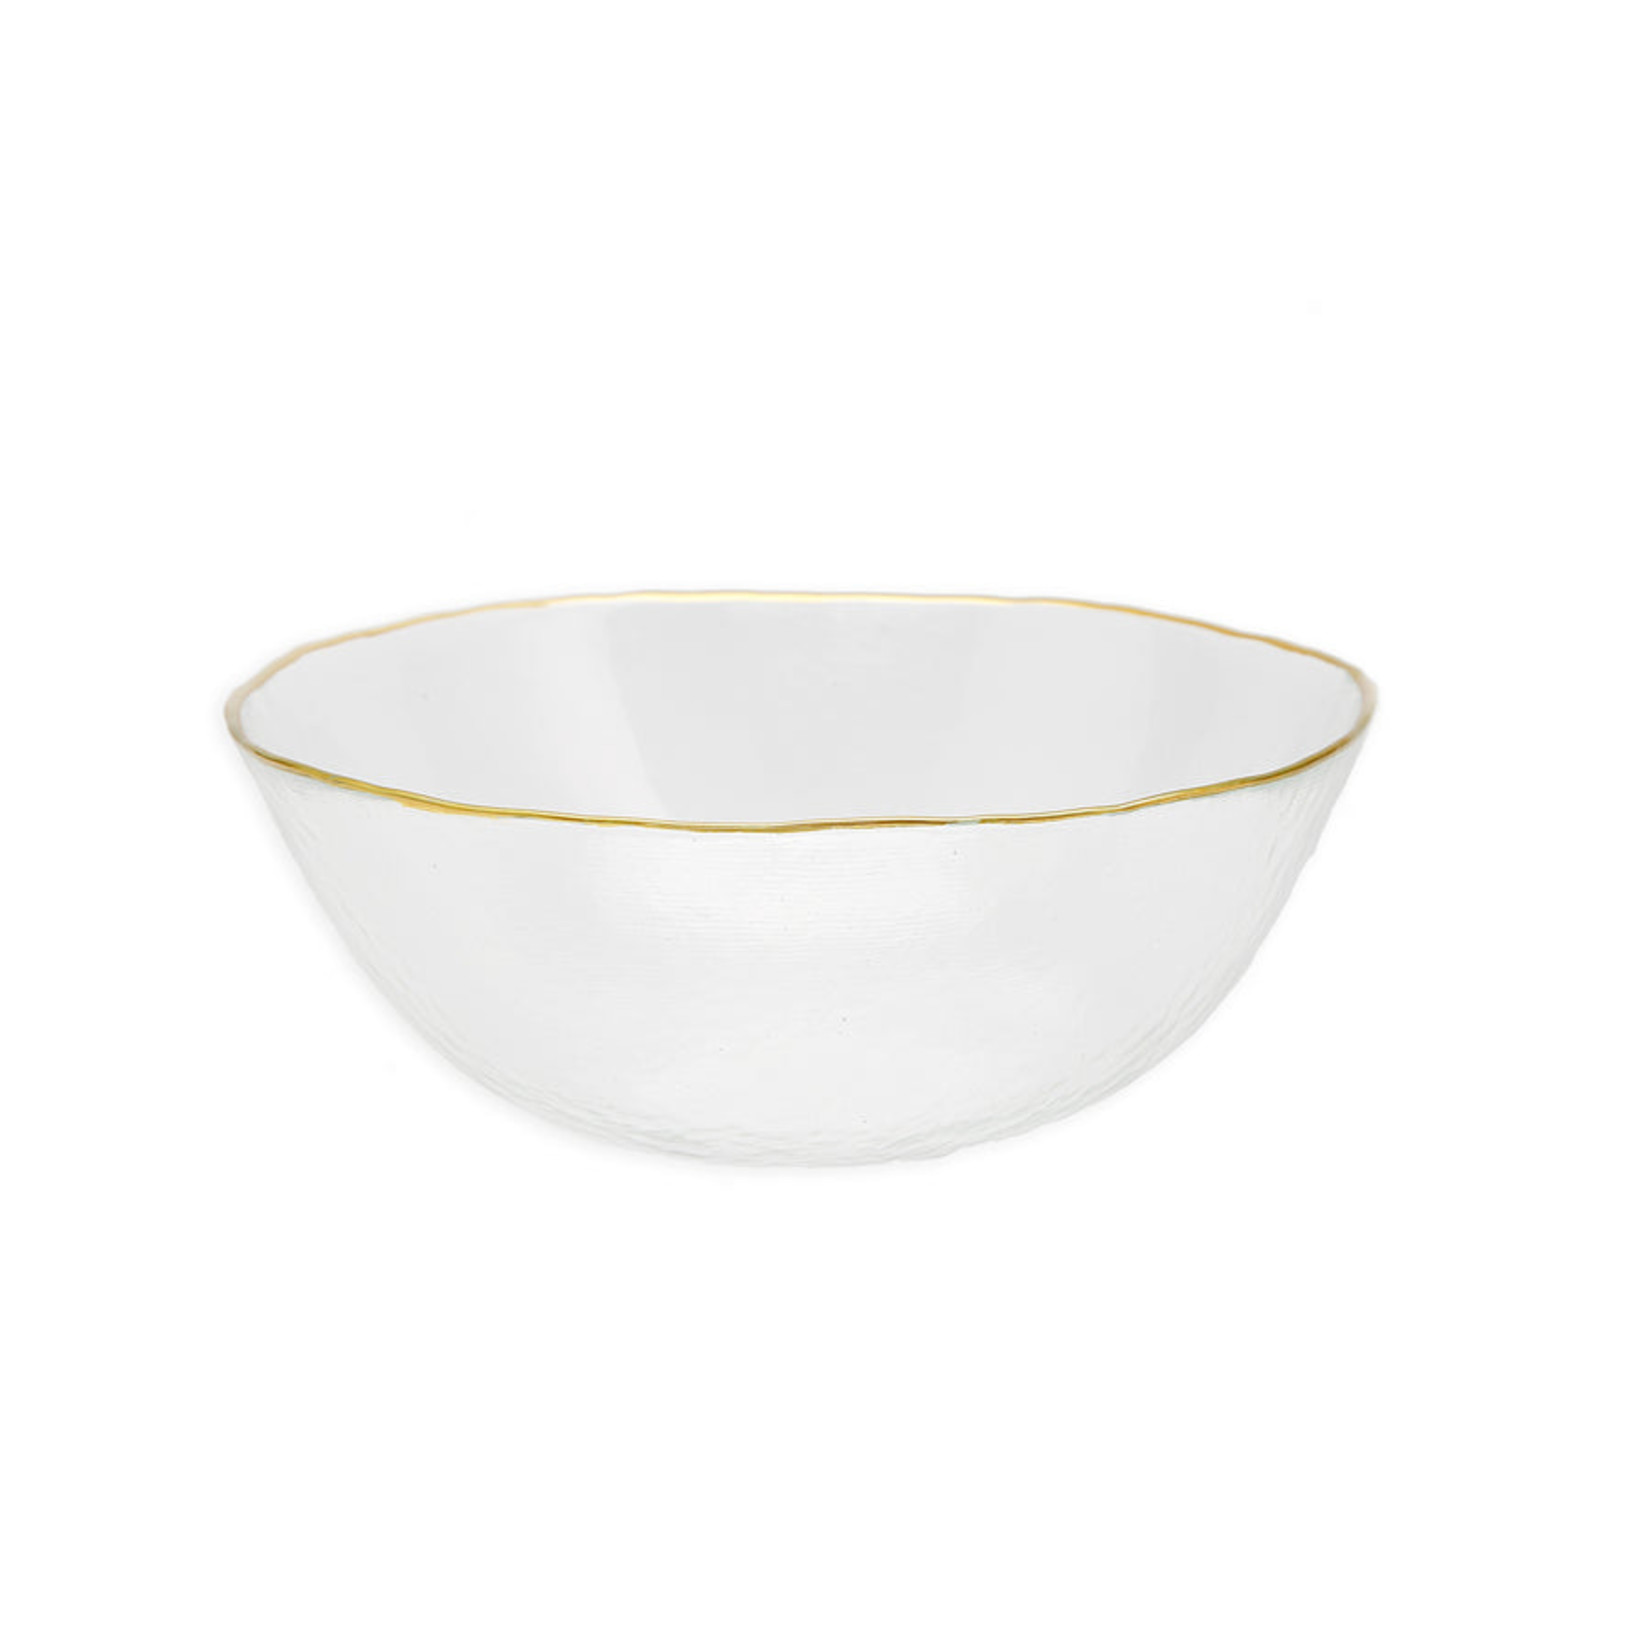 CB2559 Clear Salad Bowl with Gold Rim - 11"D